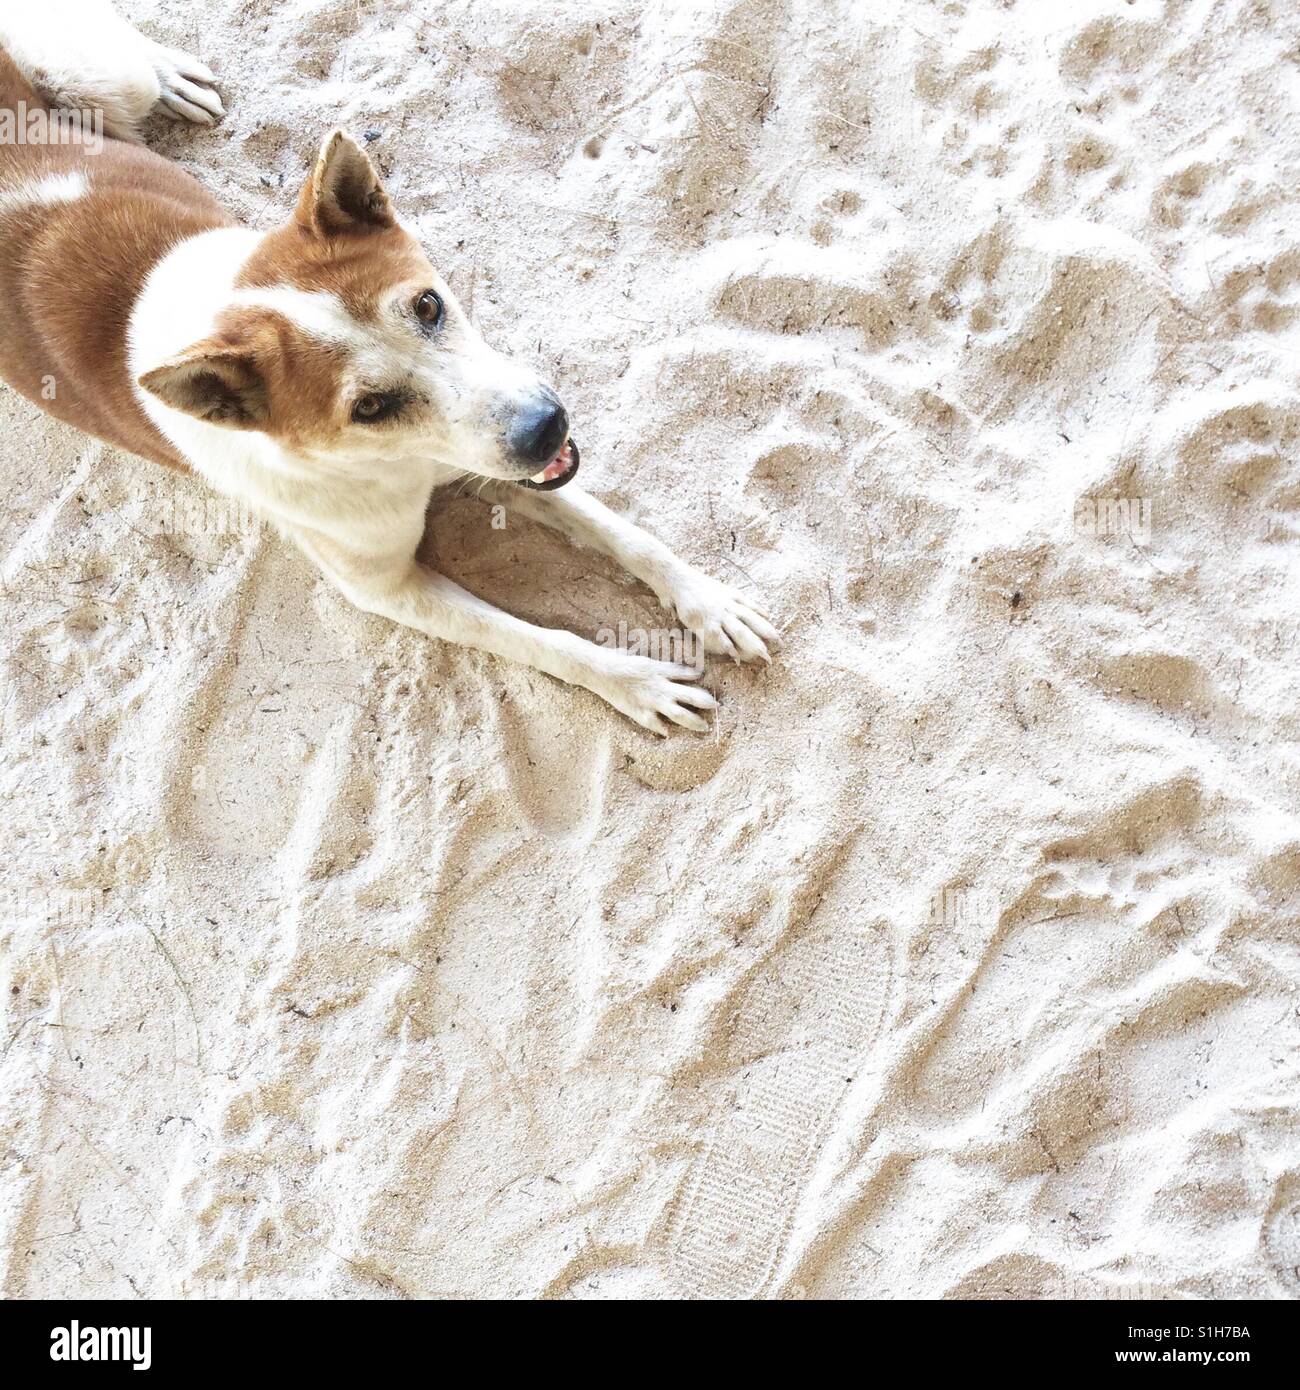 Dog with brown spots lying on sand. Stock Photo